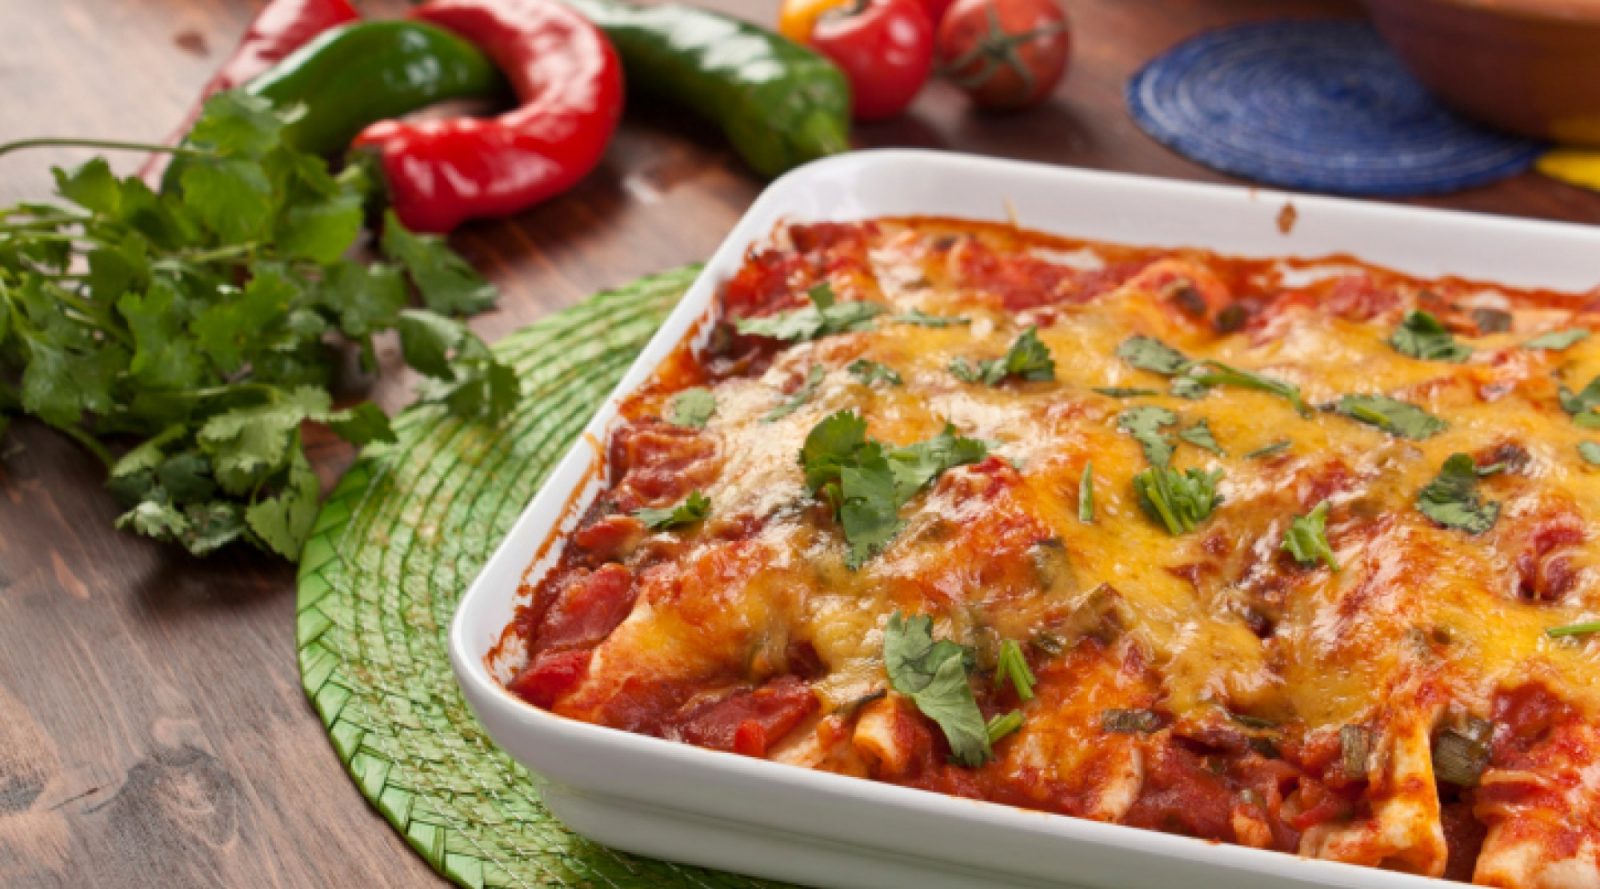 🌶 Only a Person Who Can Handle the Heat Will Have Eaten 13/25 of These Spicy Foods Enchiladas in red sauce